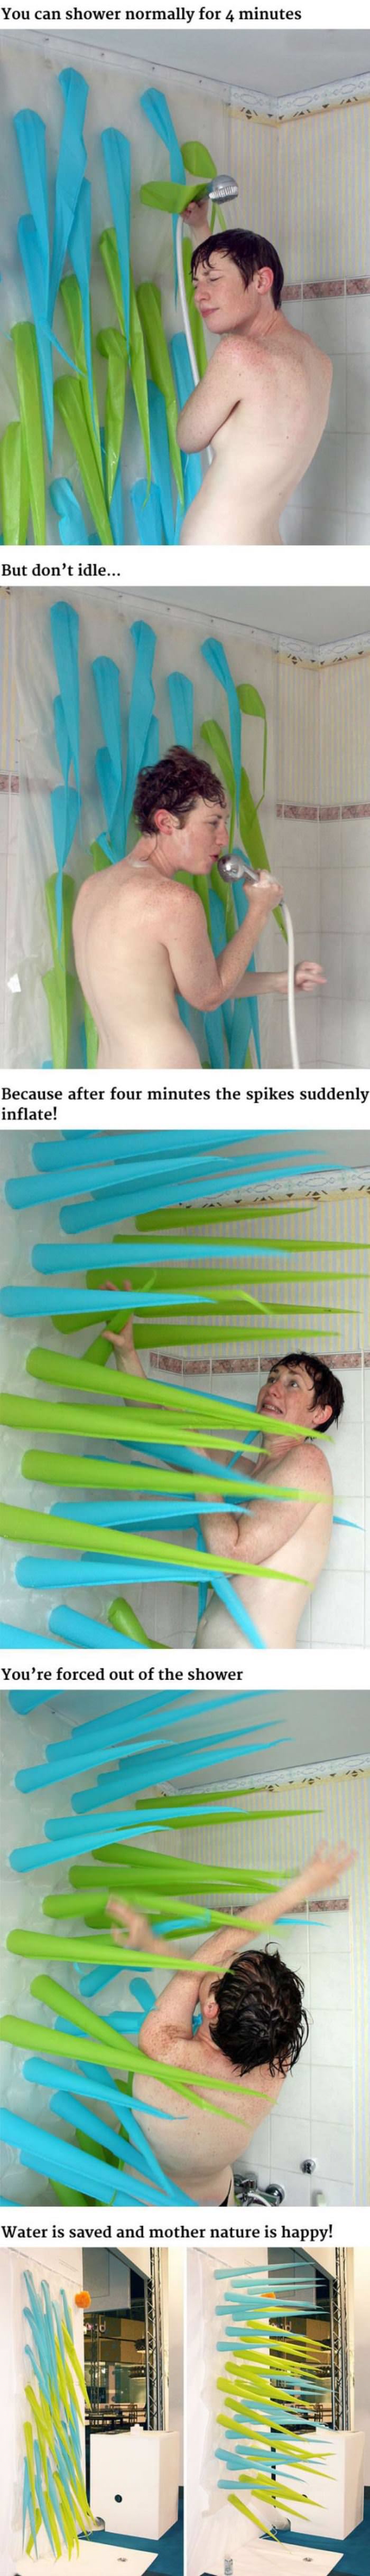 water saving shower funny picture